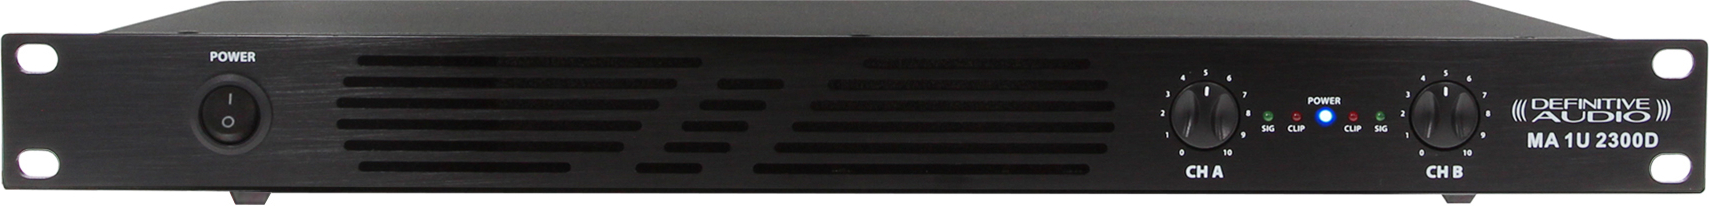 Definitive Audio Ma 1u 2300d - POWER AMPLIFIER STEREO - Main picture